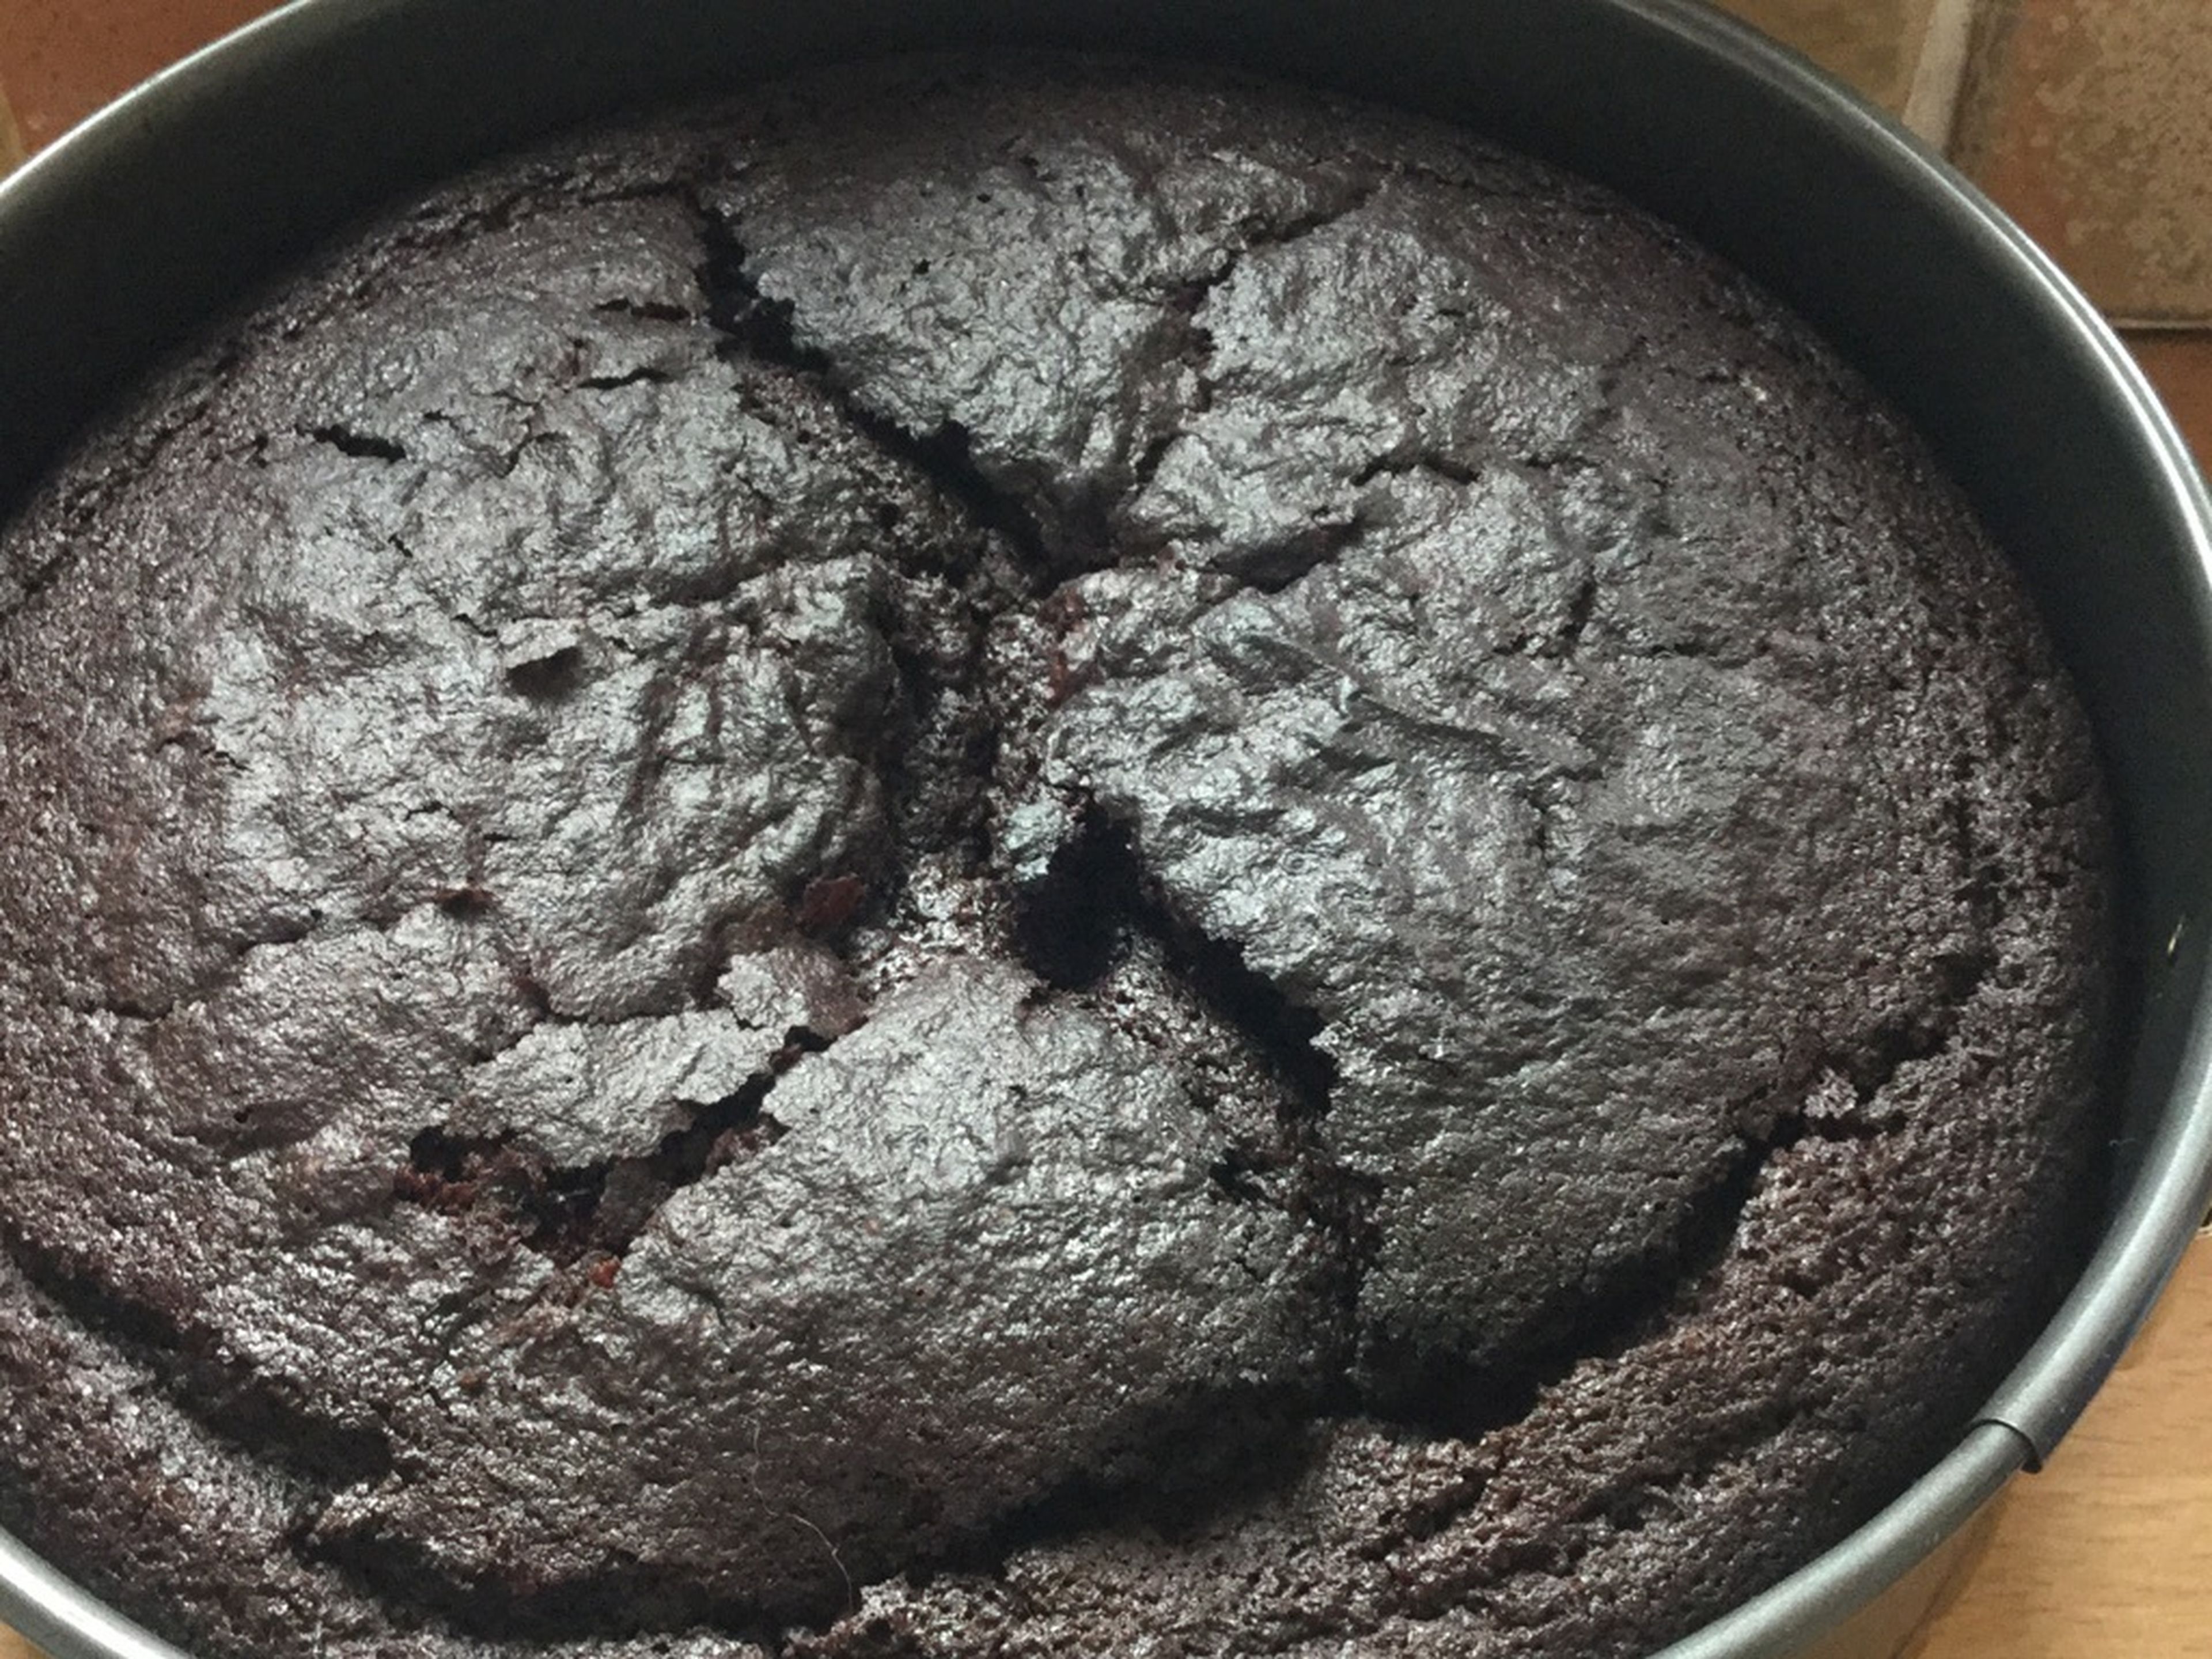 Ensure the cake is cooled (approx. 2 hrs.) before it is removed from the pan and iced.